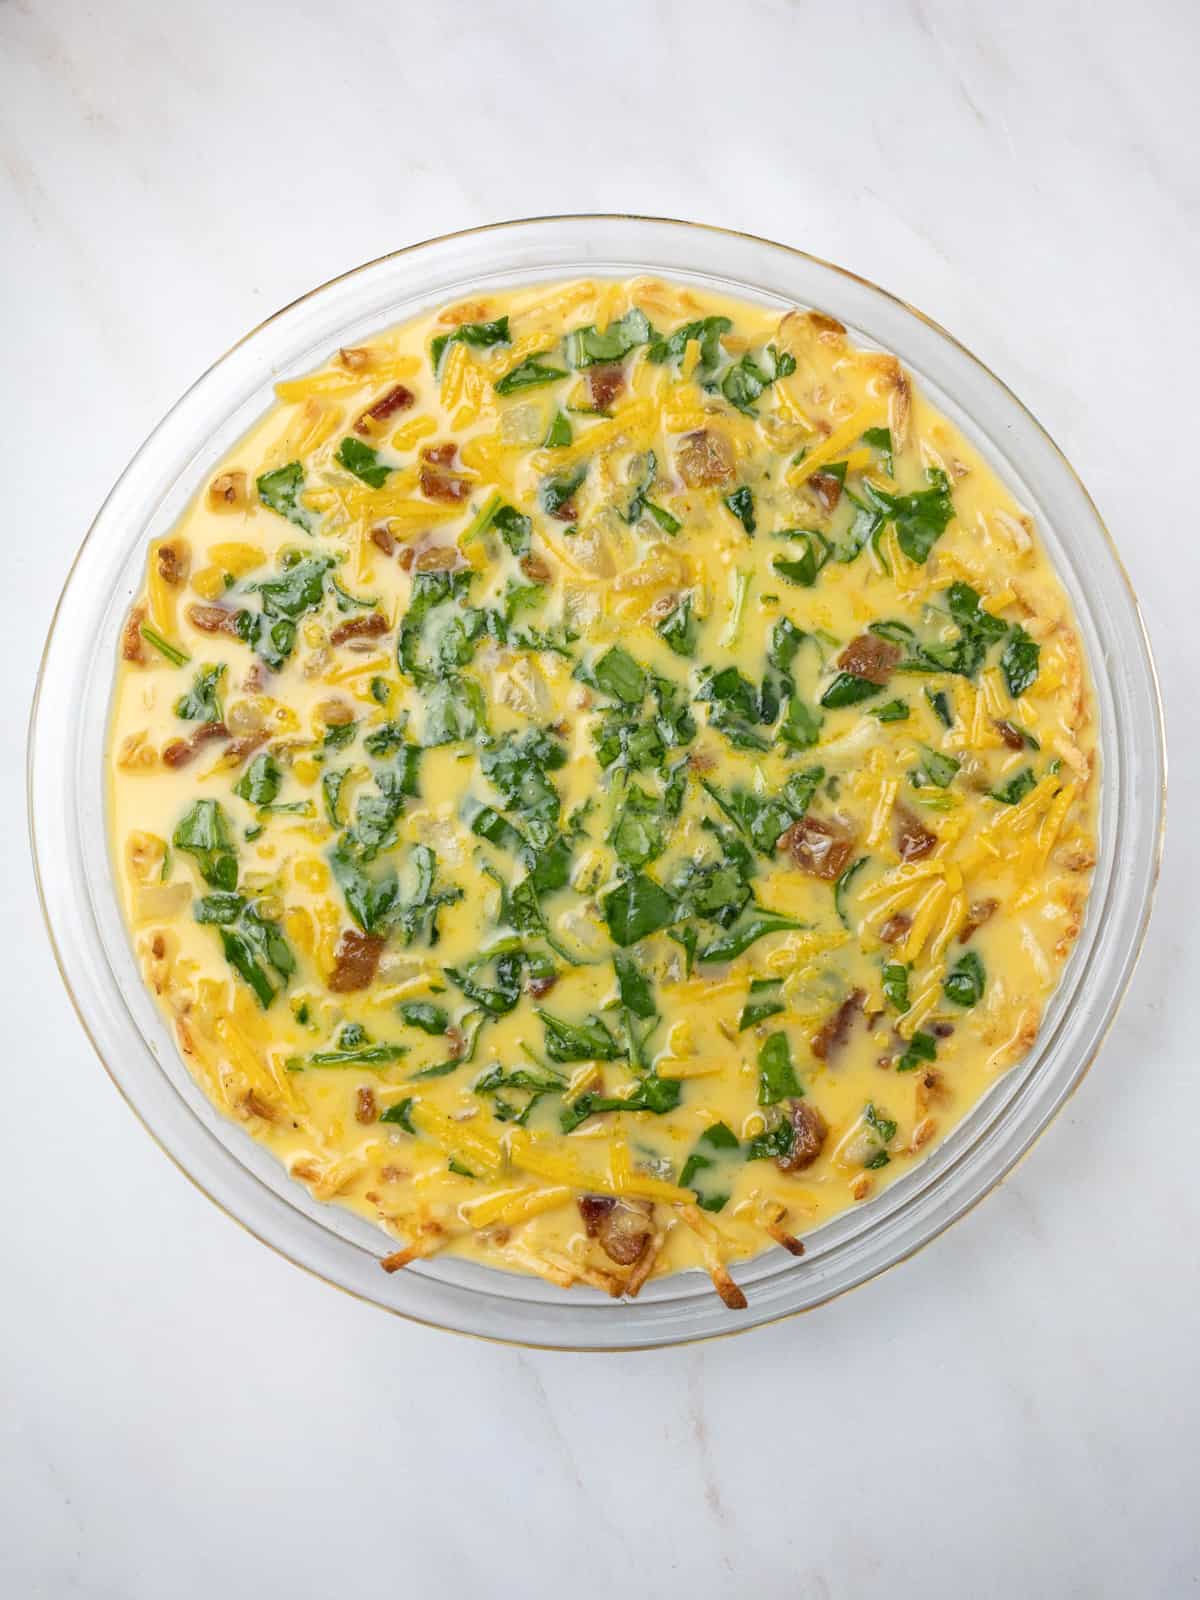 Dairy-free gluten-free quiche before it goes into the oven.